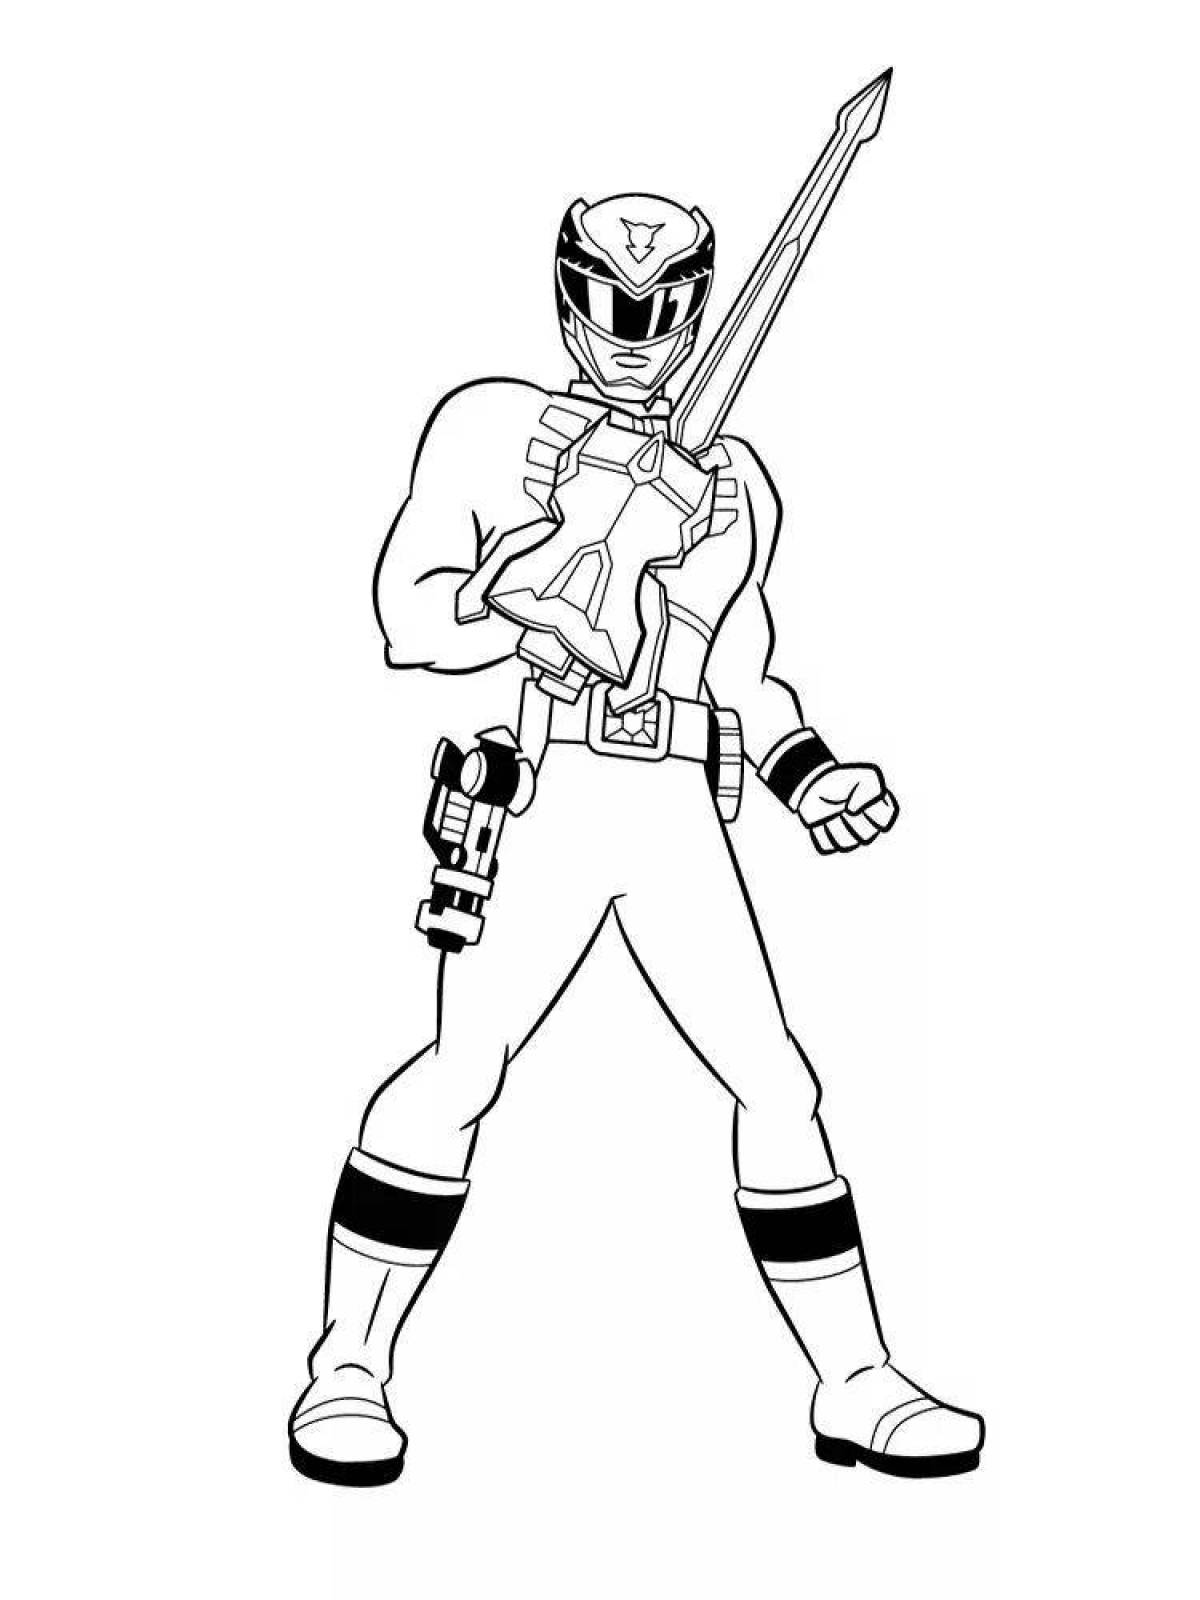 Luminous power coloring page